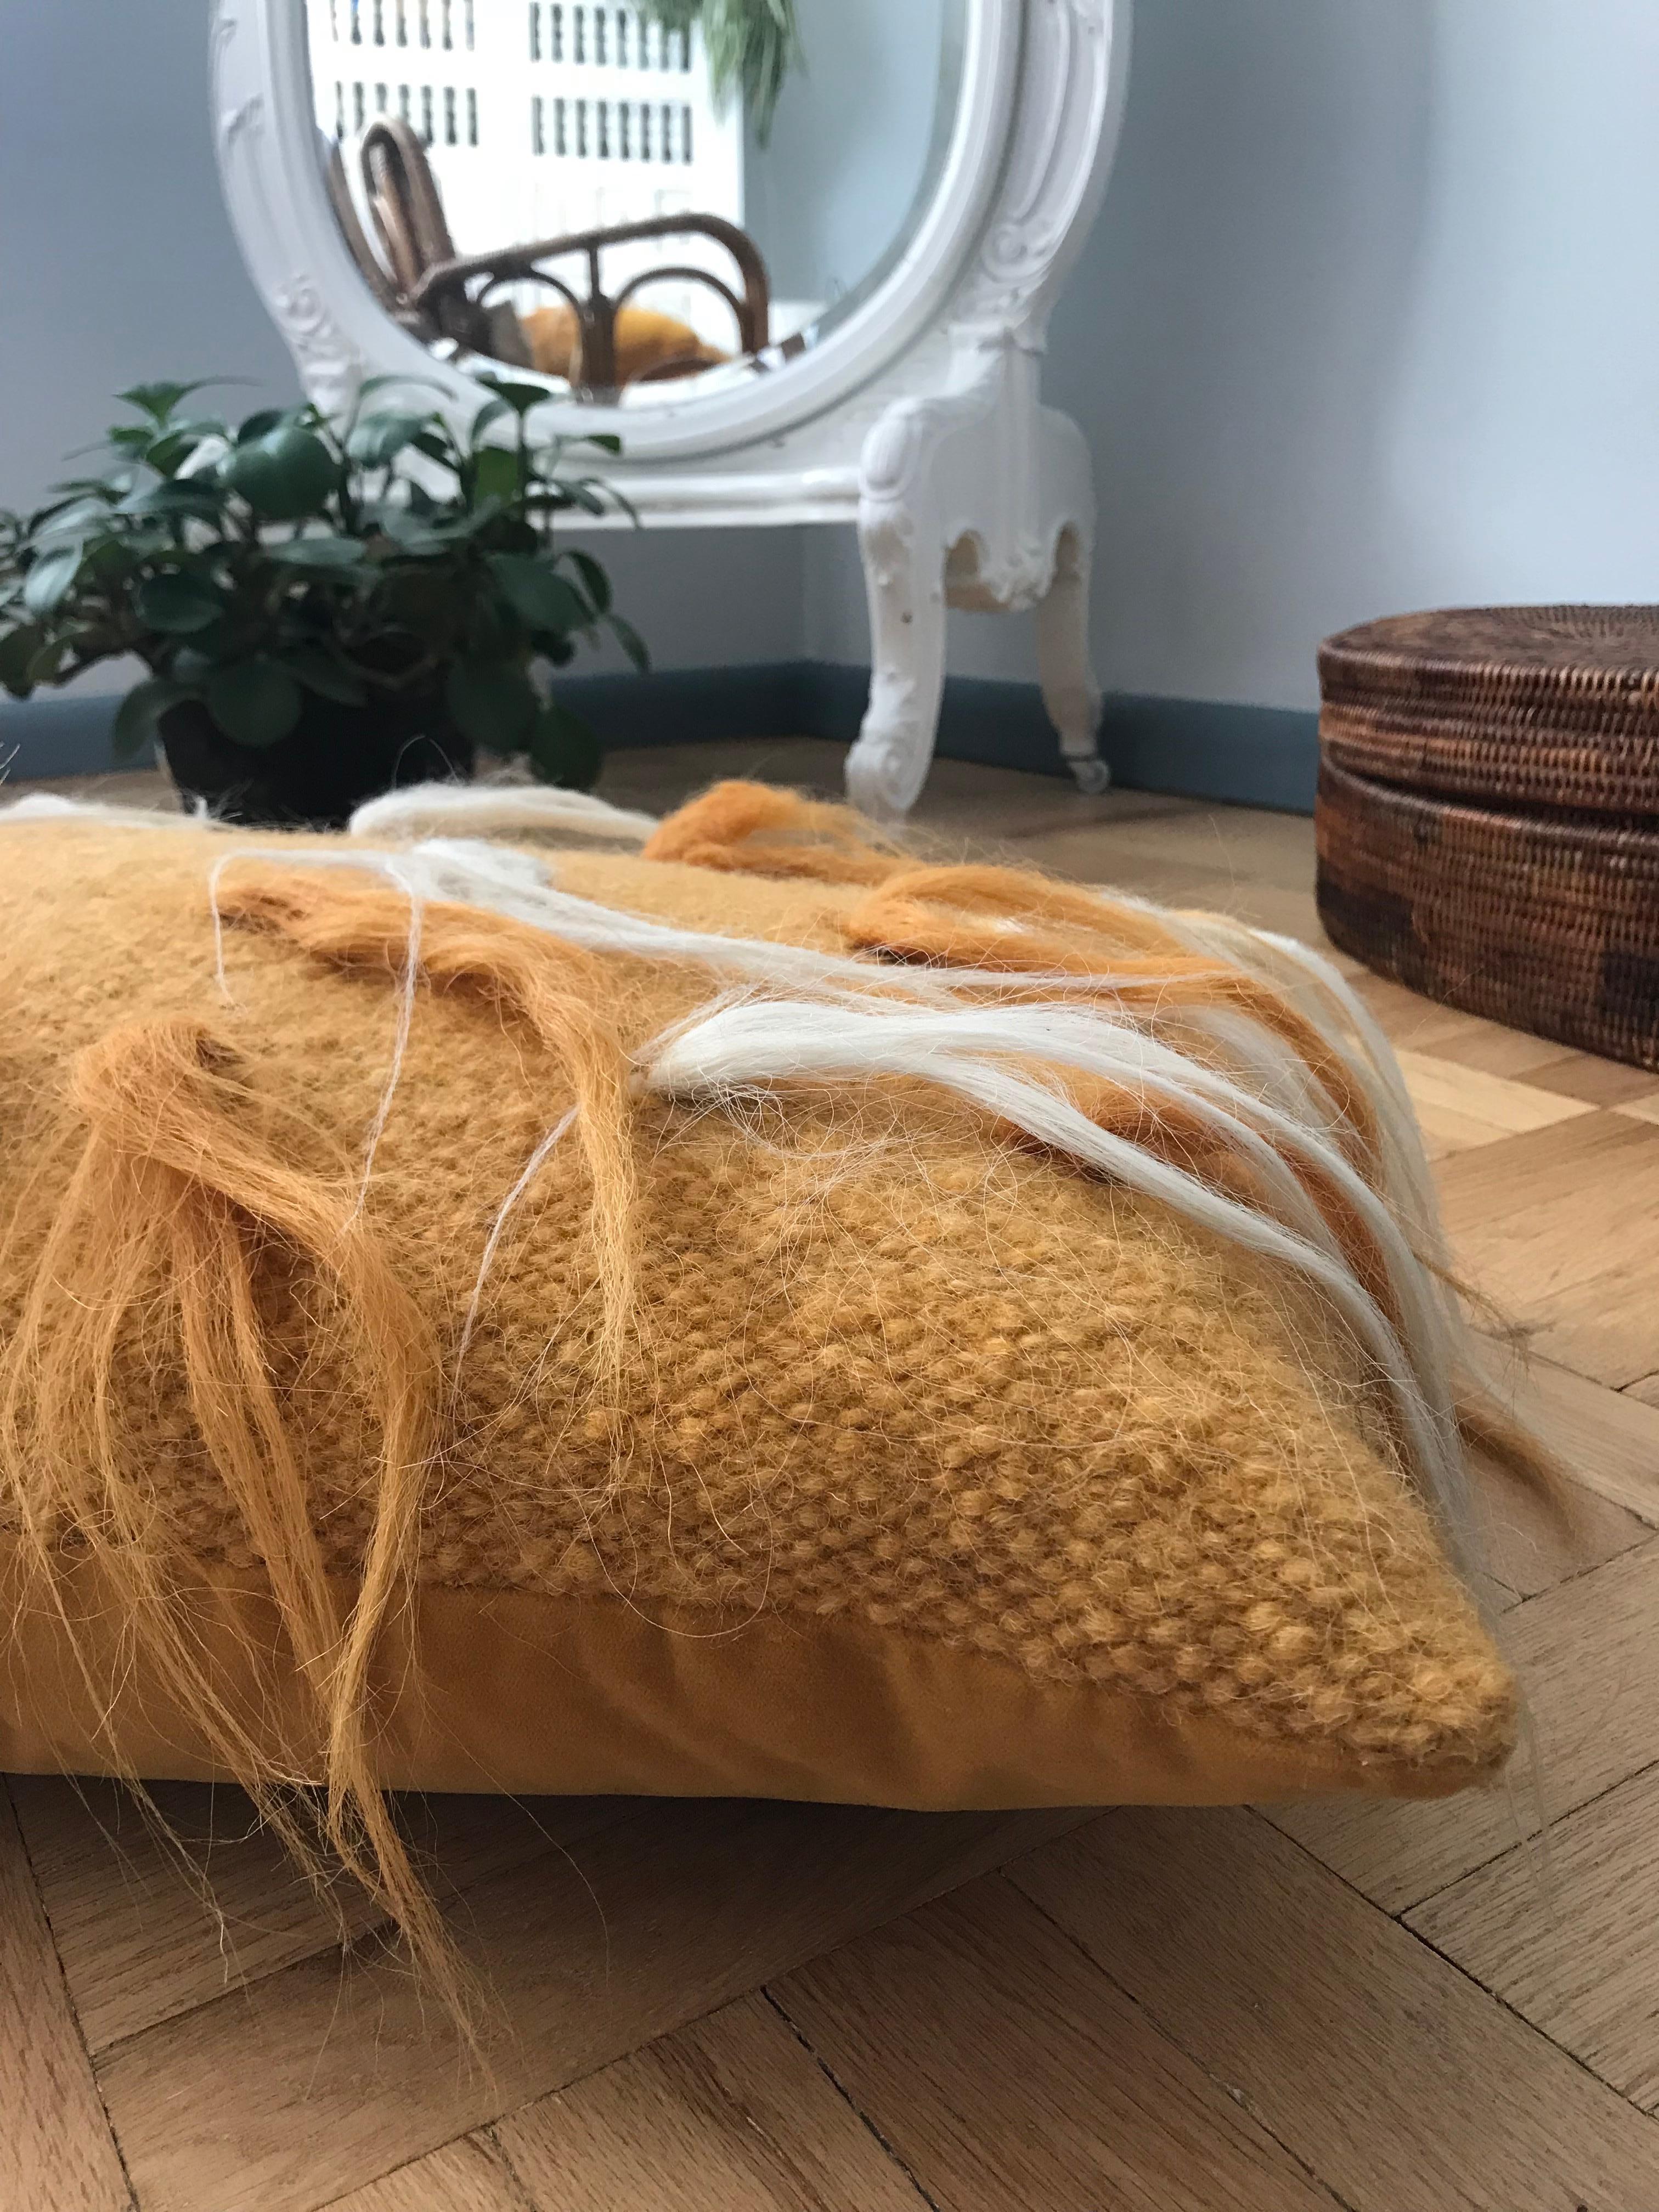 Handwoven and seasonally felted wool from long haired sheep in Europe, finished with plush velvet backing. While the weaving and felting methods date back hundreds of years, the design and contrasting colors bring this traditional weaving into the